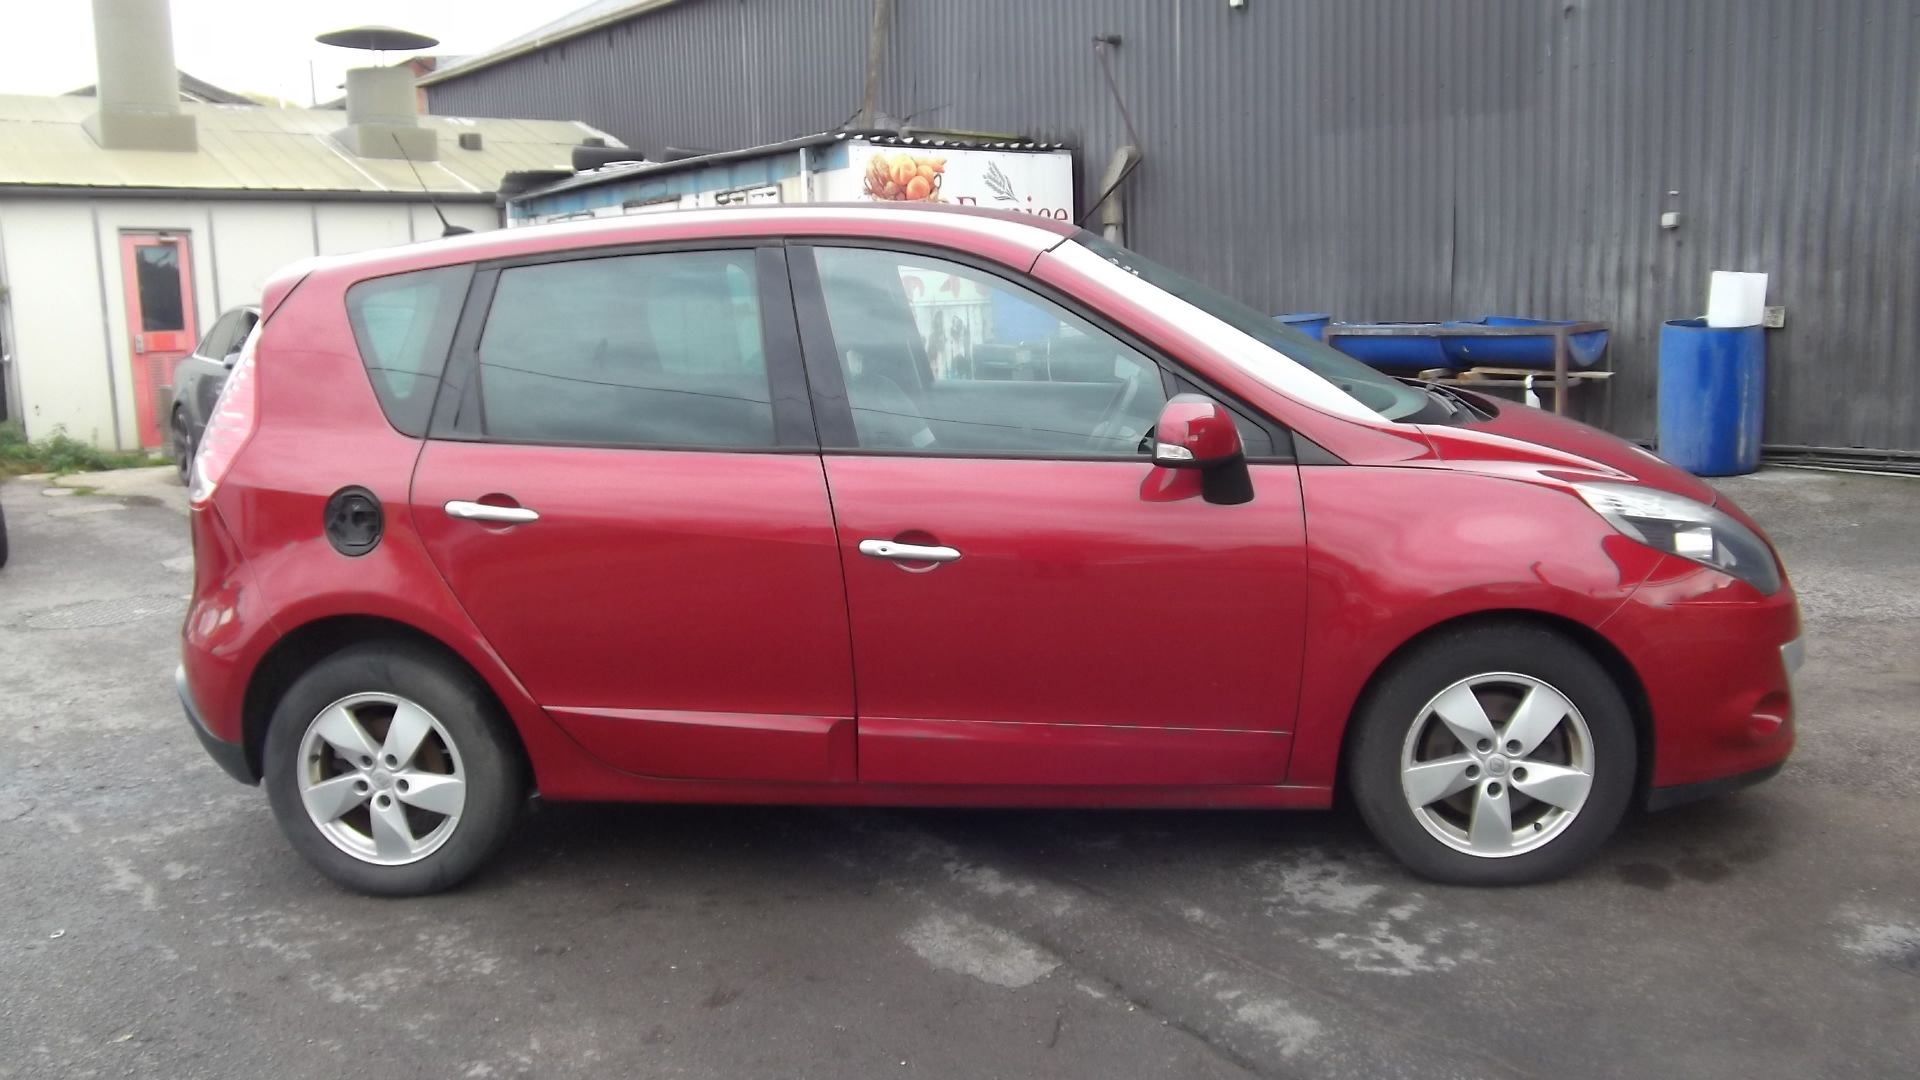 2011 Renault Scenic 1.5 DCI Dynamique Tom Tom 5 Door MPV - Image 5 of 17